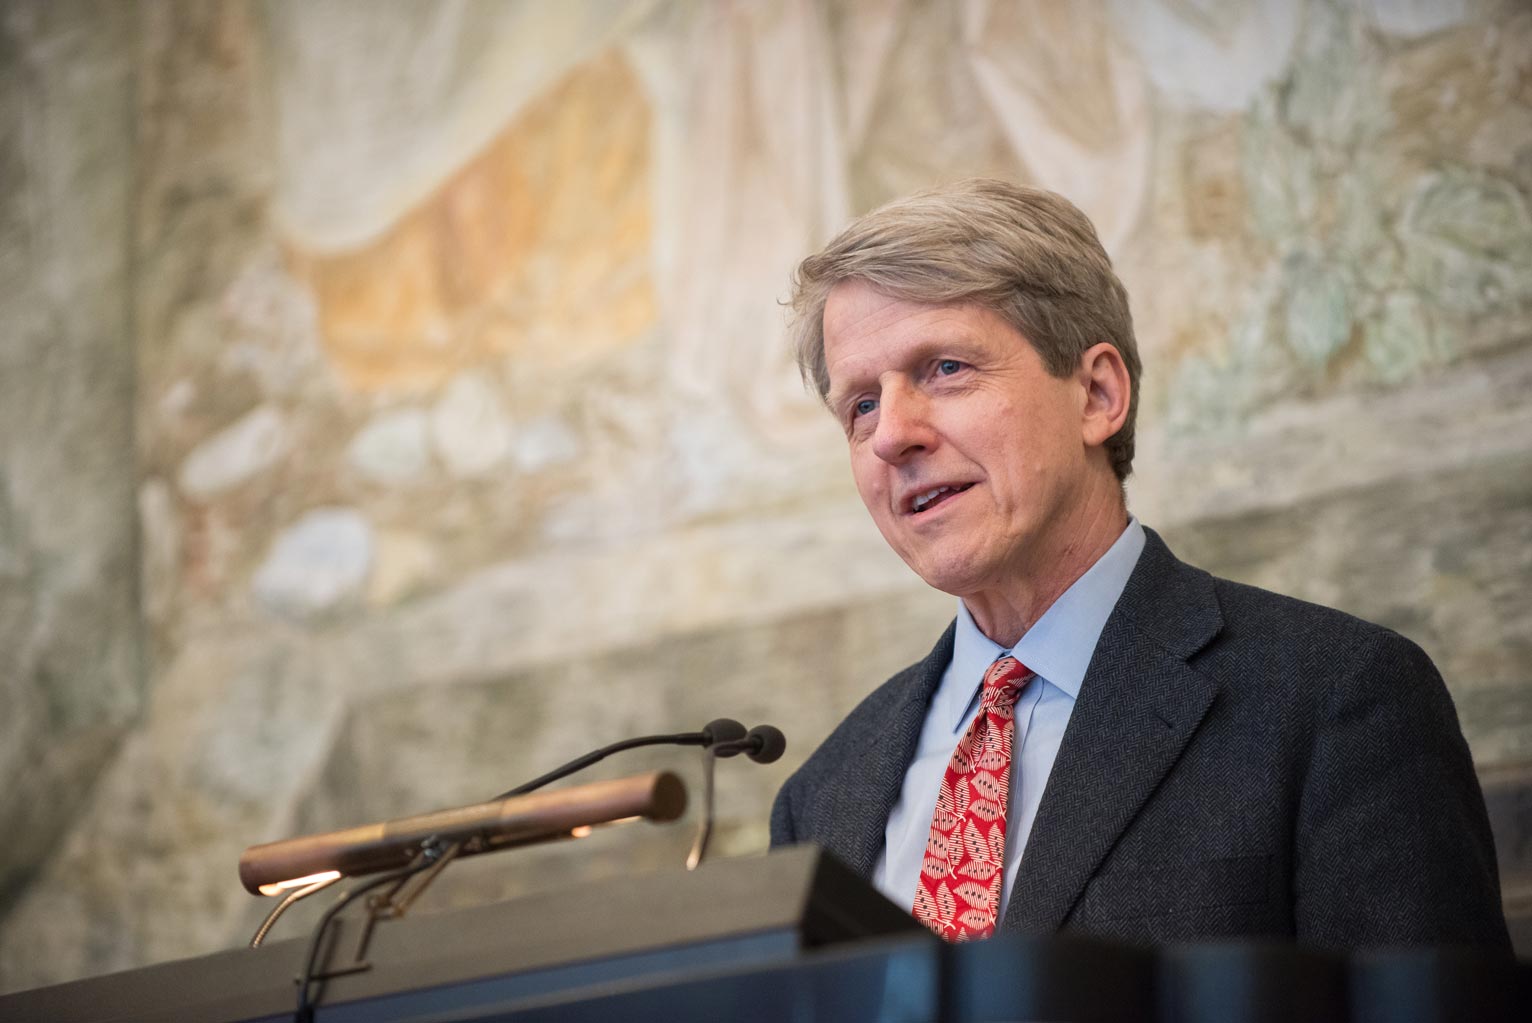 Nobel Prize Winner Robert Shiller honors the 'unsung heroes' fighting against market abuse and therefore for a smoothly functioning market economy.